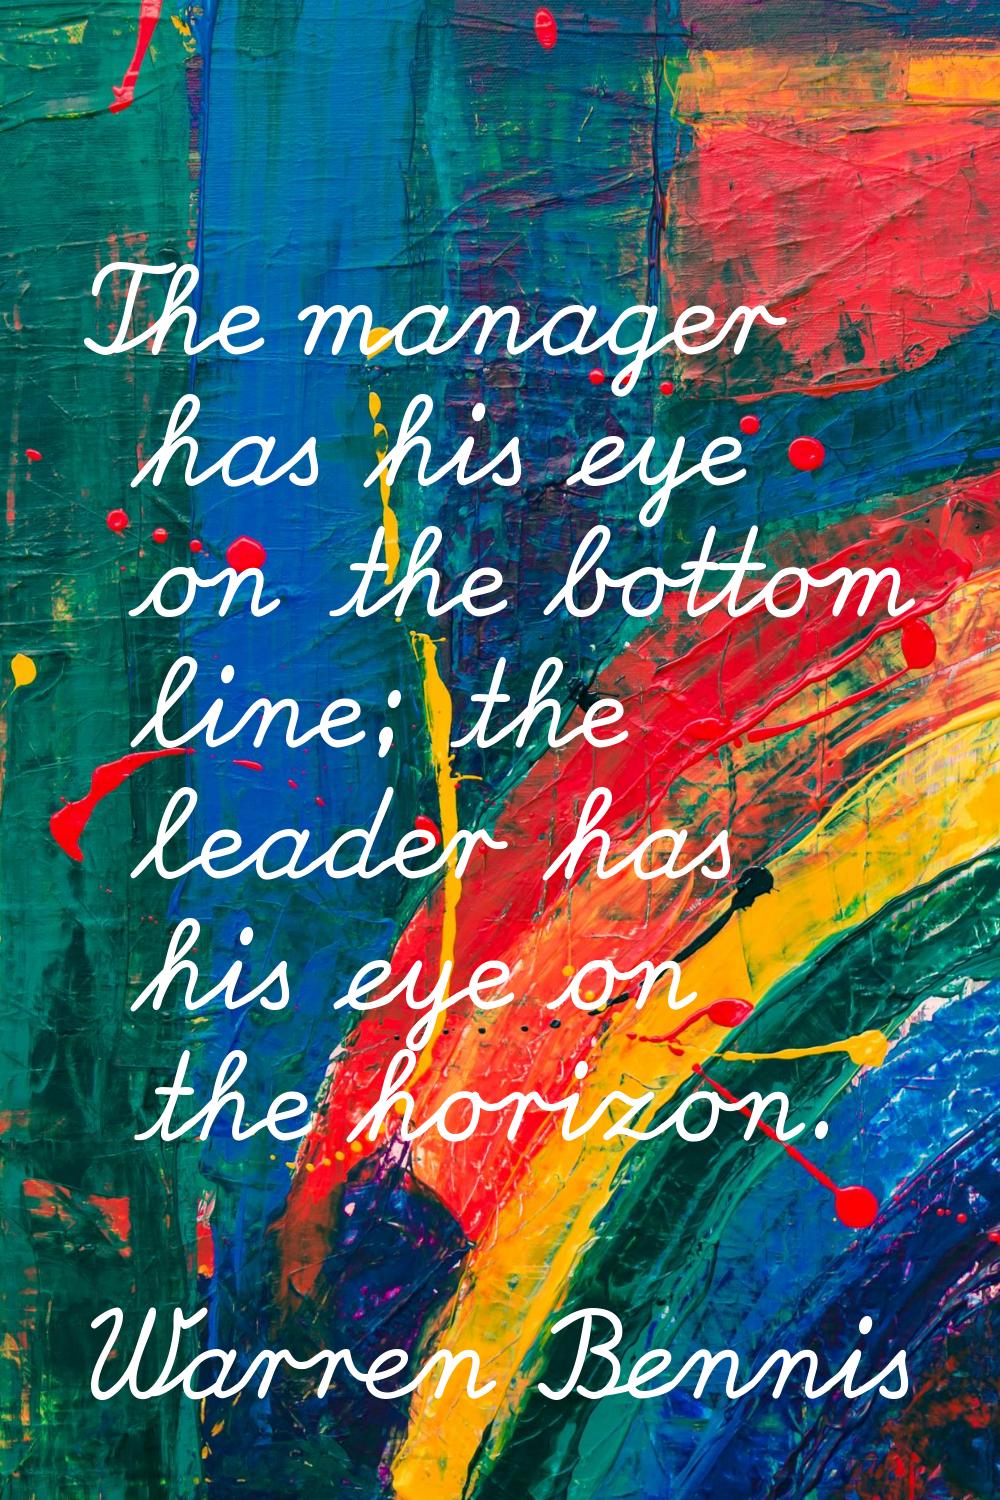 The manager has his eye on the bottom line; the leader has his eye on the horizon.